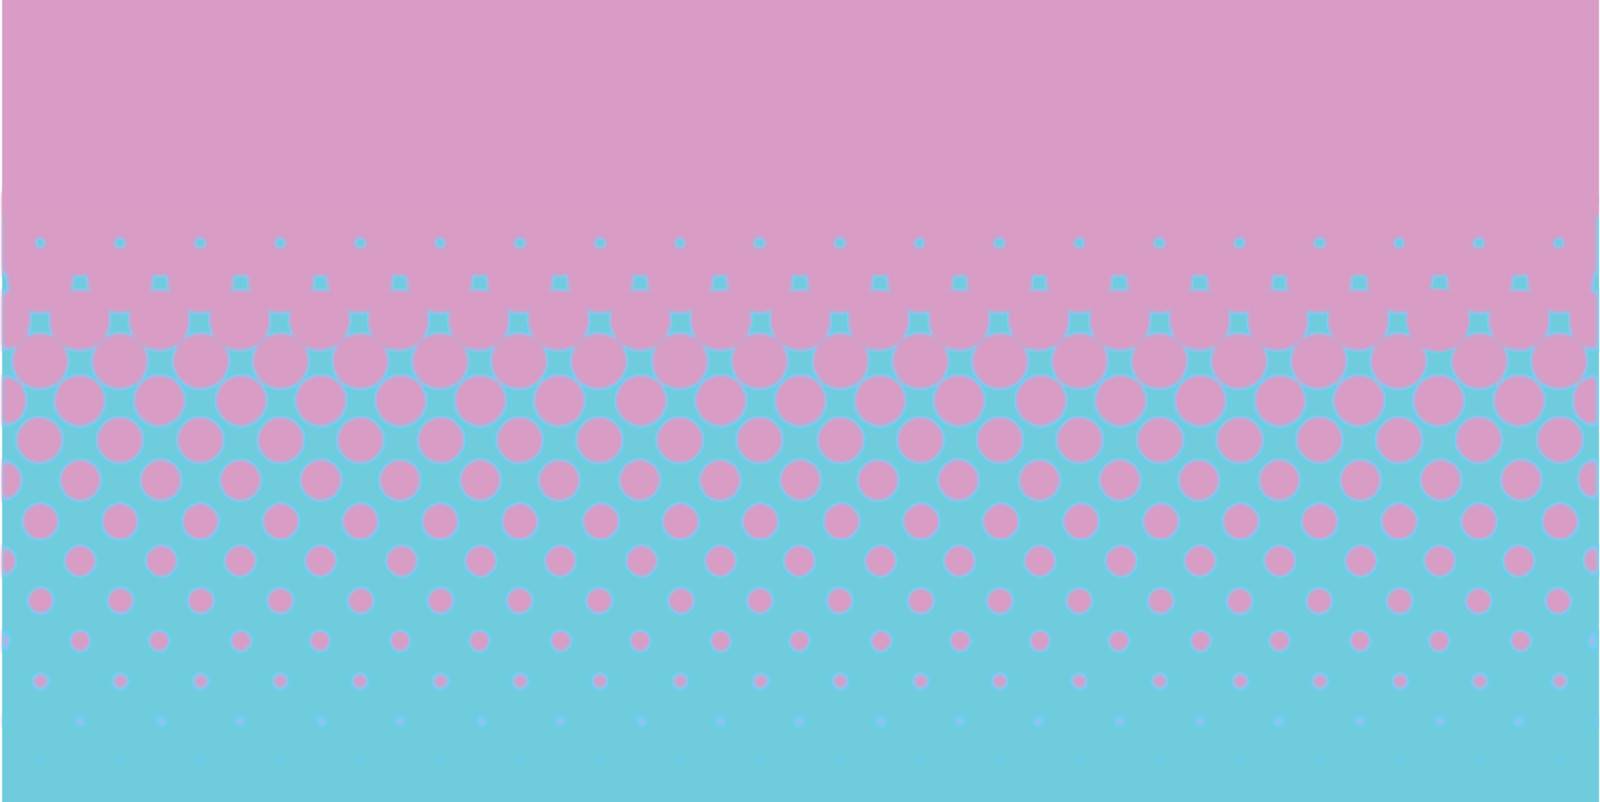 A half tone image with pinkdots set against a blue background.